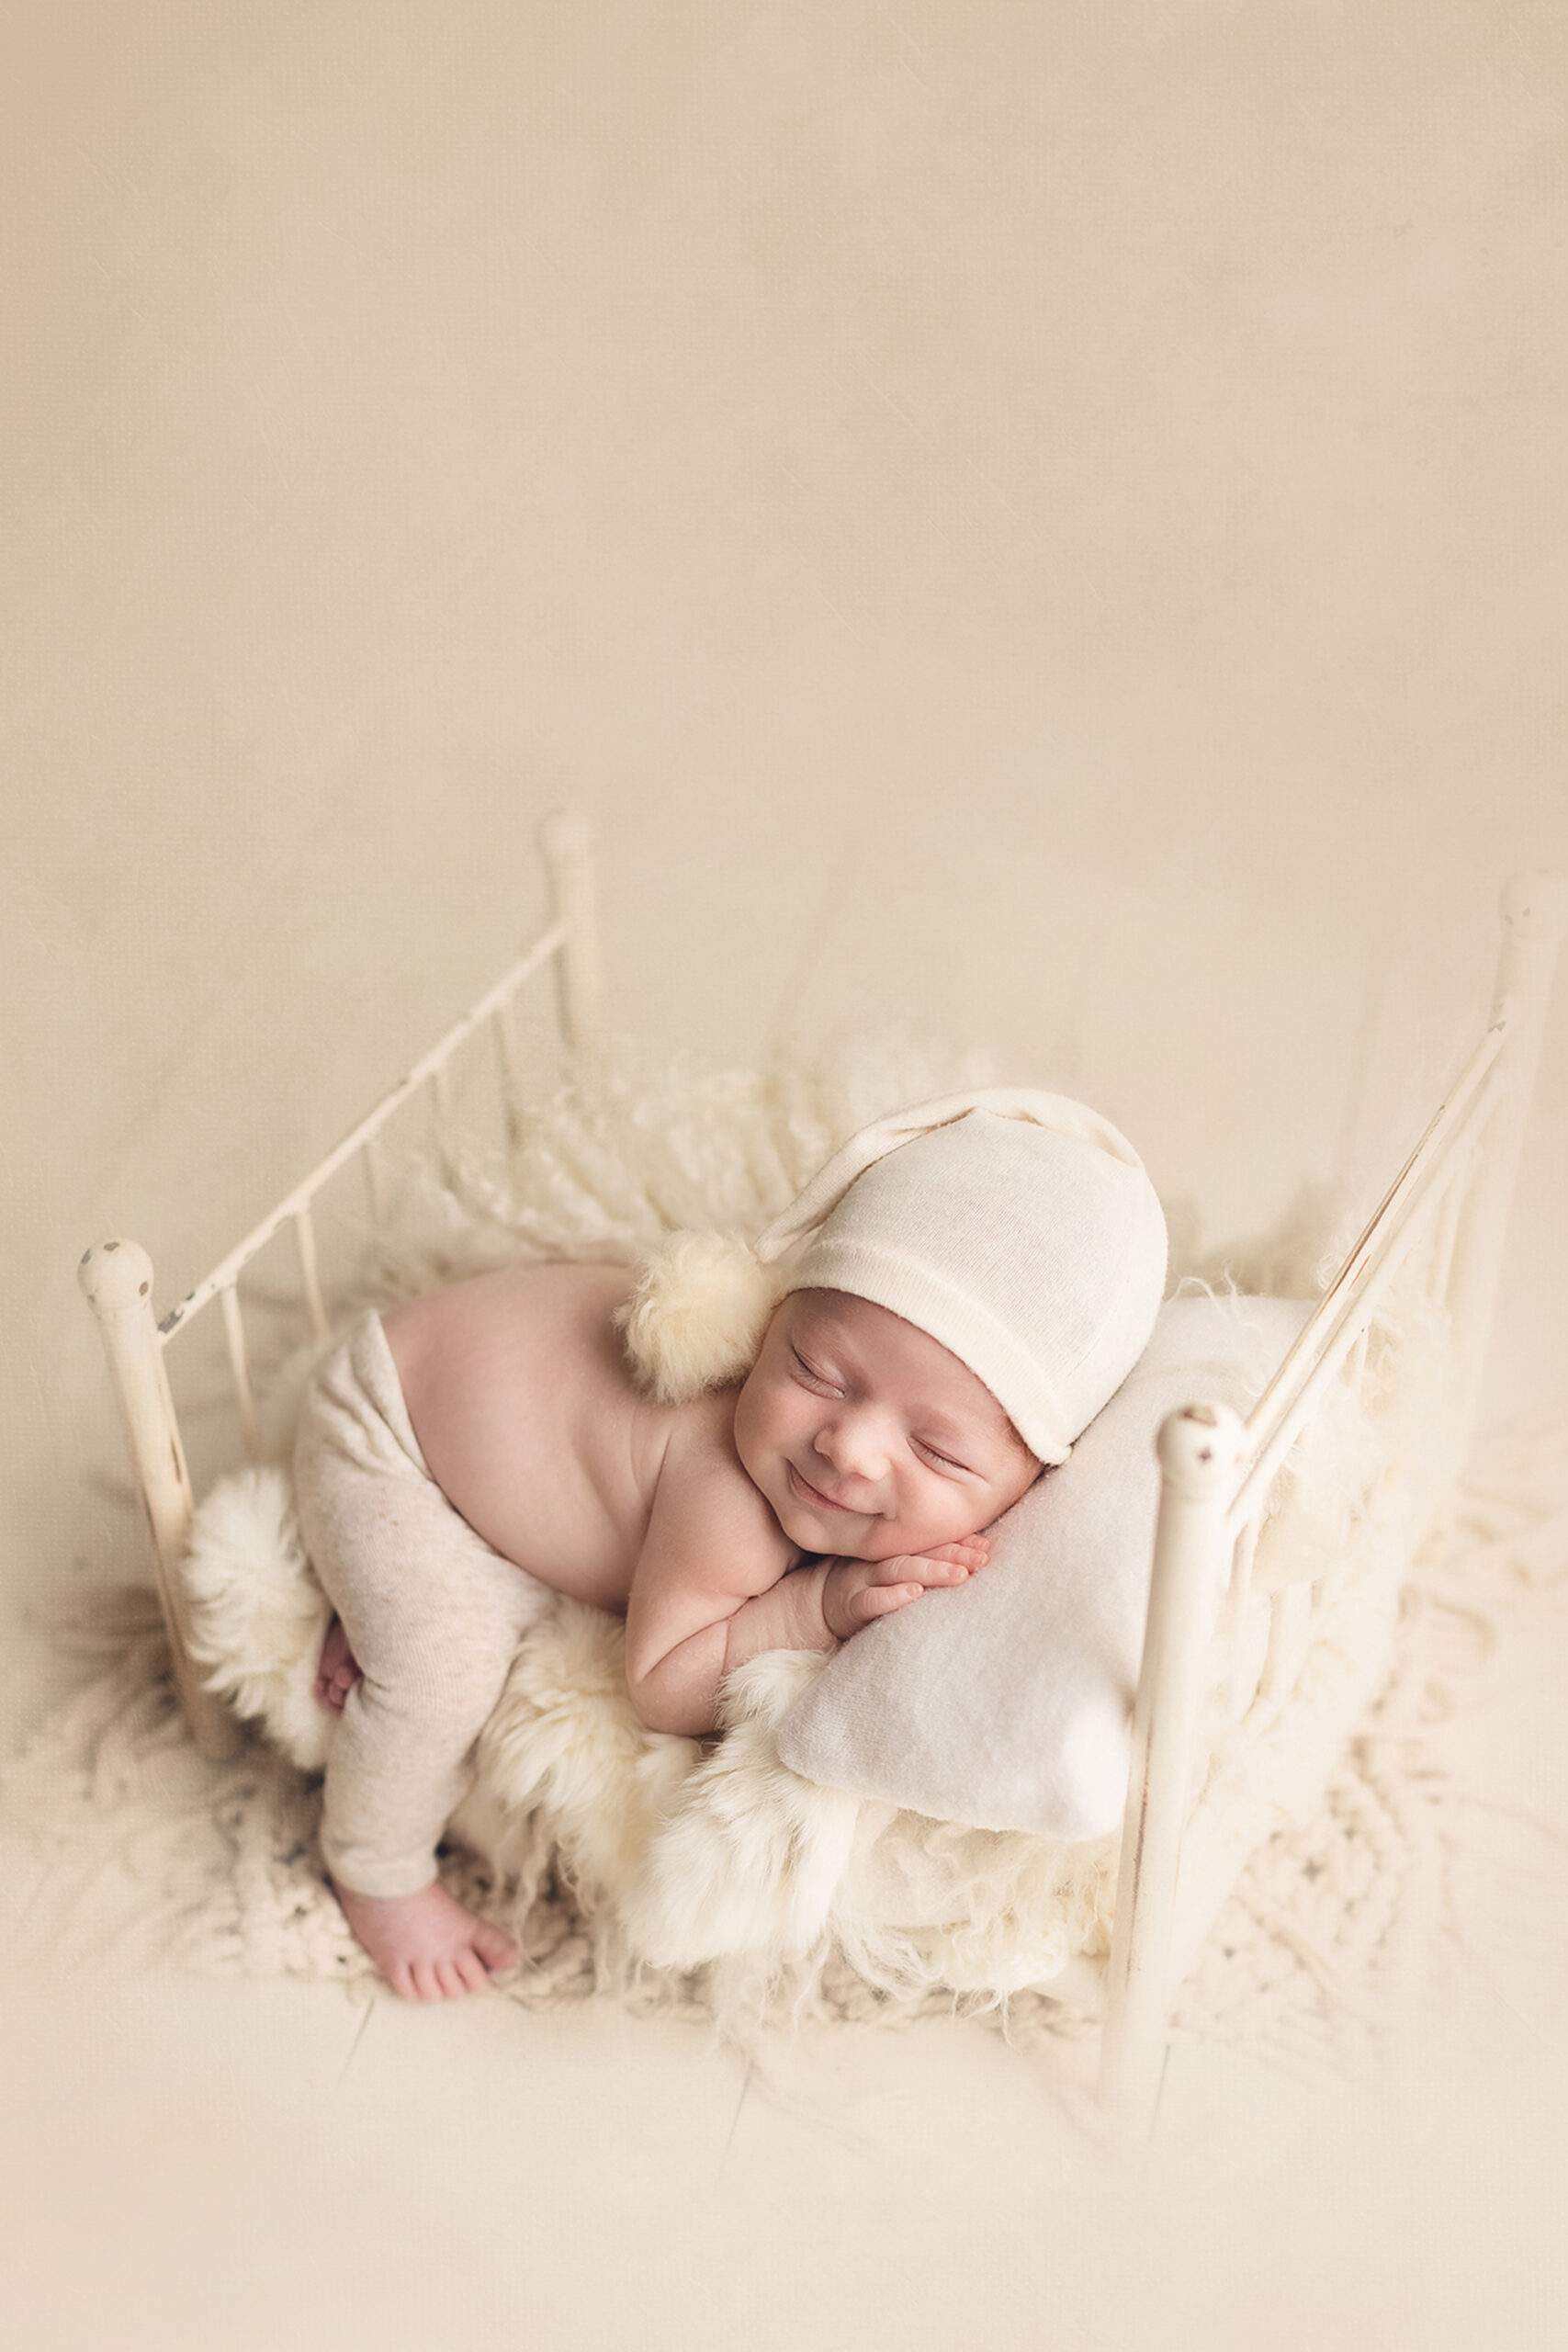 Newborn photography baby boy sleeping in a white bed